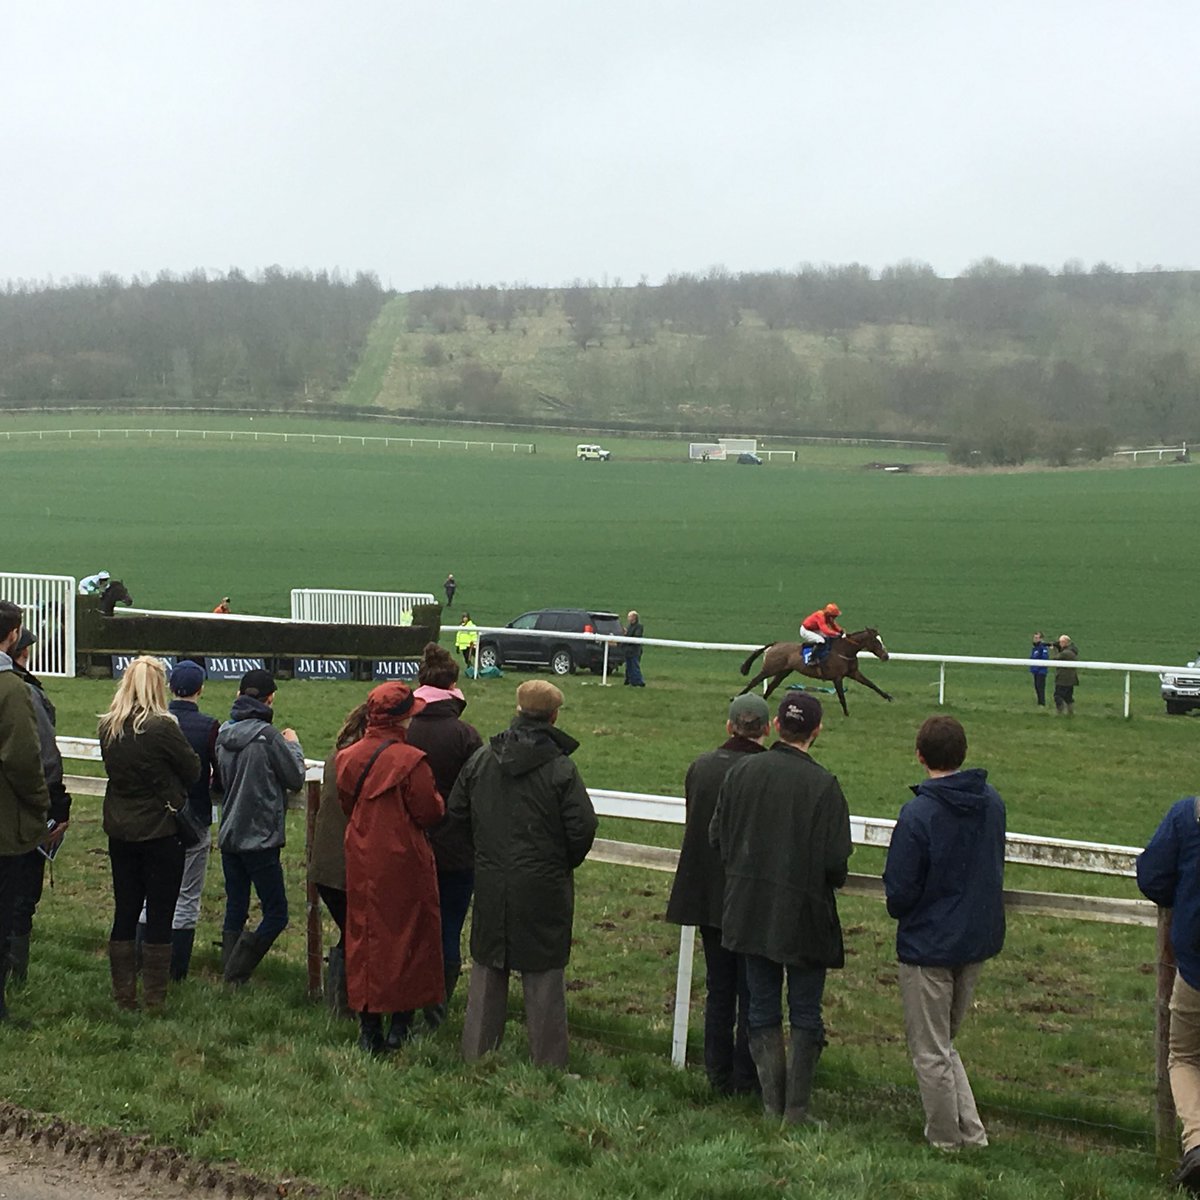 A fun afternoon with a good crowd at Barbury supporting the @TedworthP2P #PointToPoint #Barbury #MarlboroughDowns